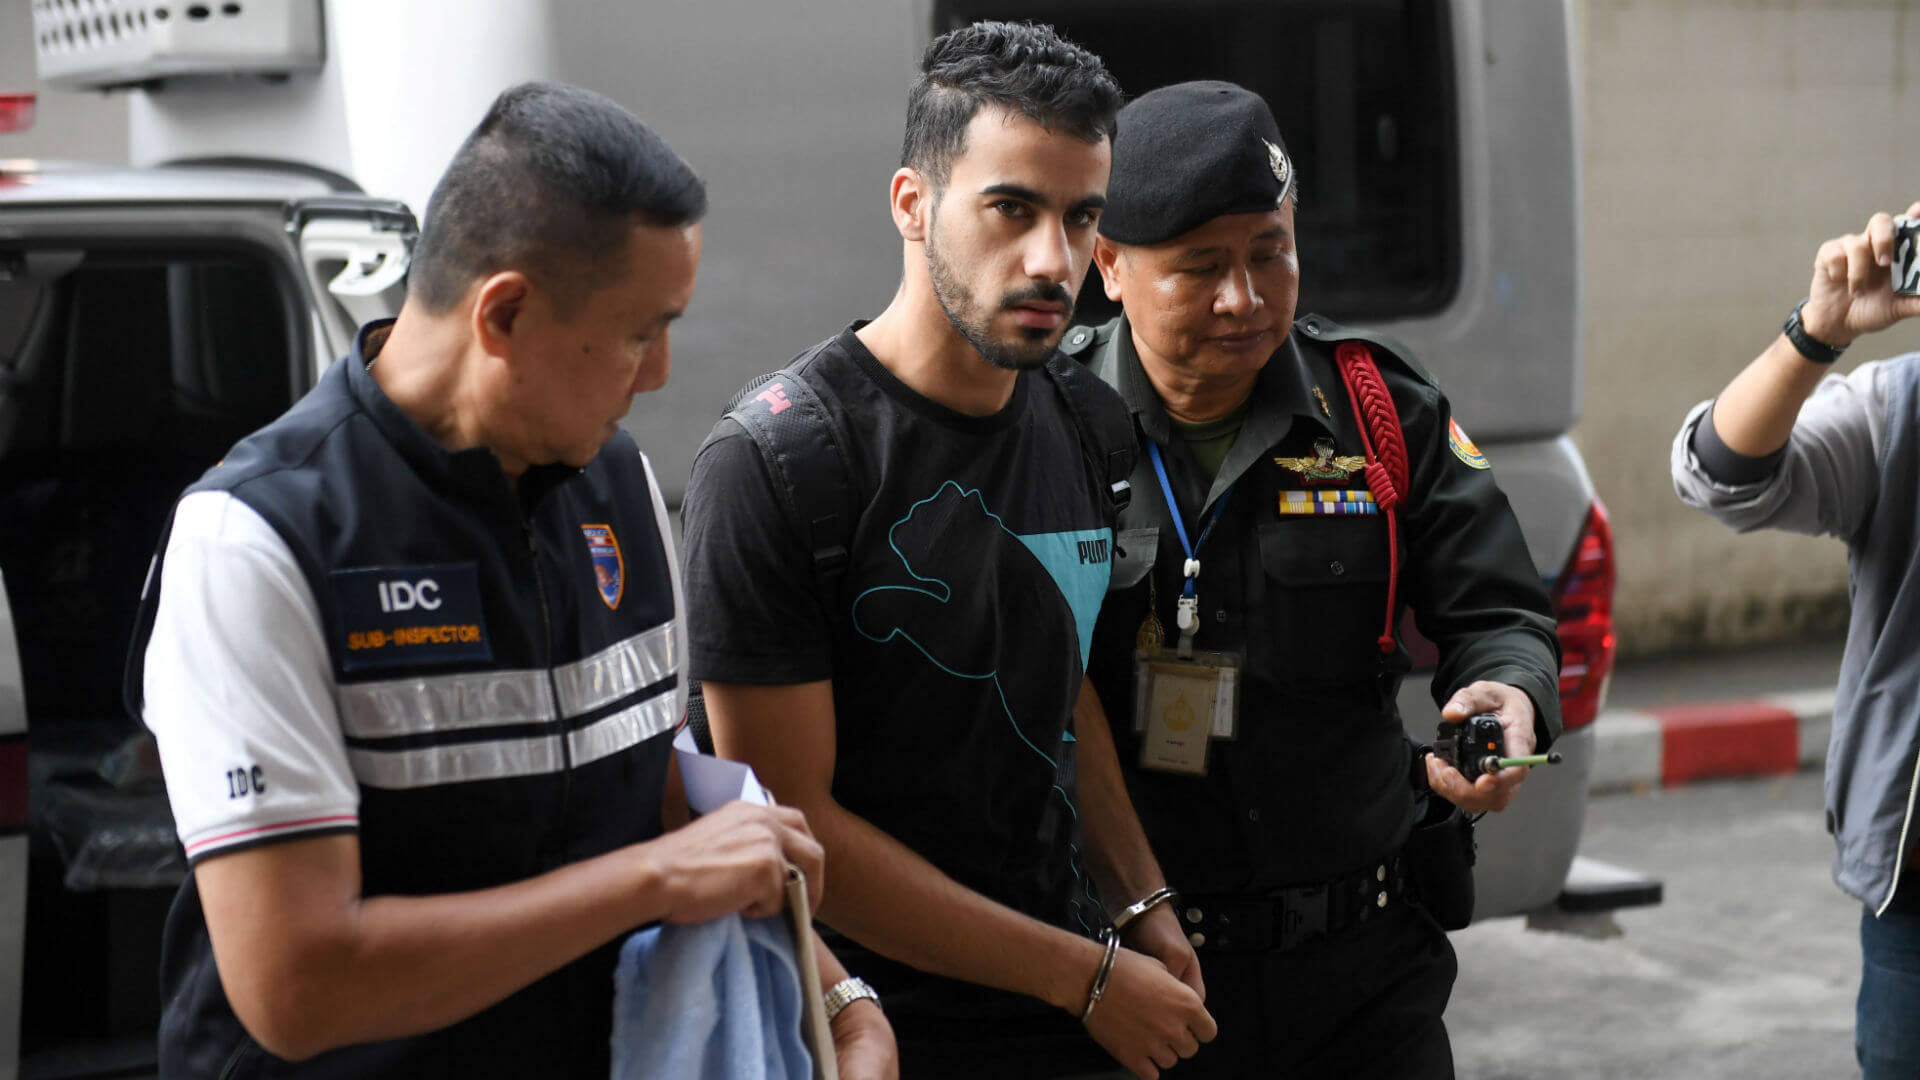 Bahrani football player being held in Thailand continues to draw global attention, will be held until at least mid April